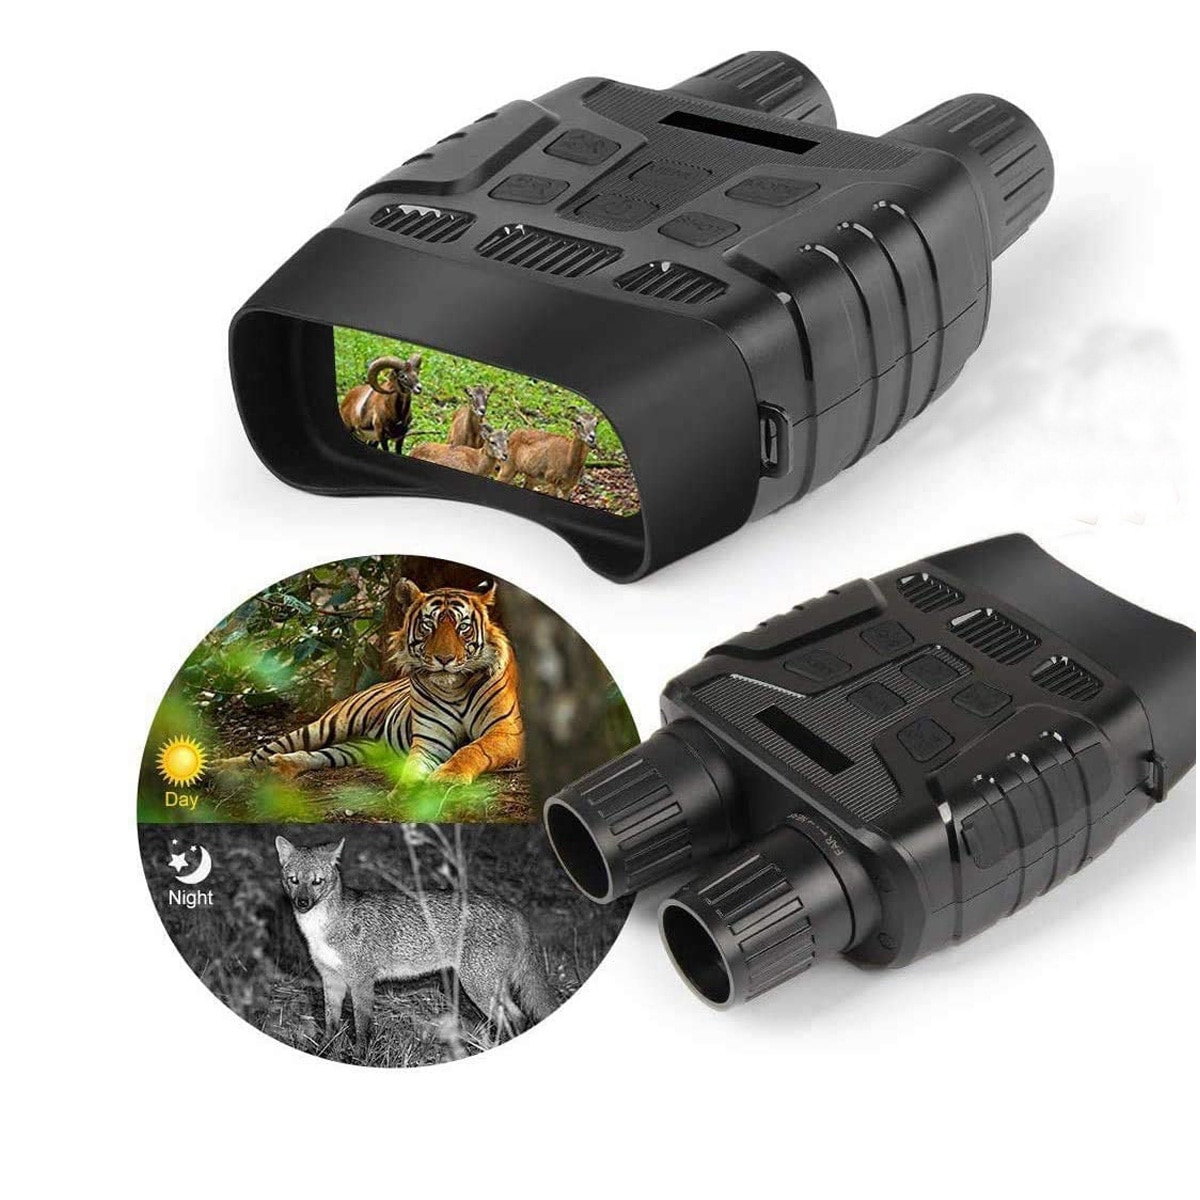 Professional Infrared Night Vision Binoculars Digital Camera Military Hunting IR Telescopes For Night Fishing With 2.31'' LCD